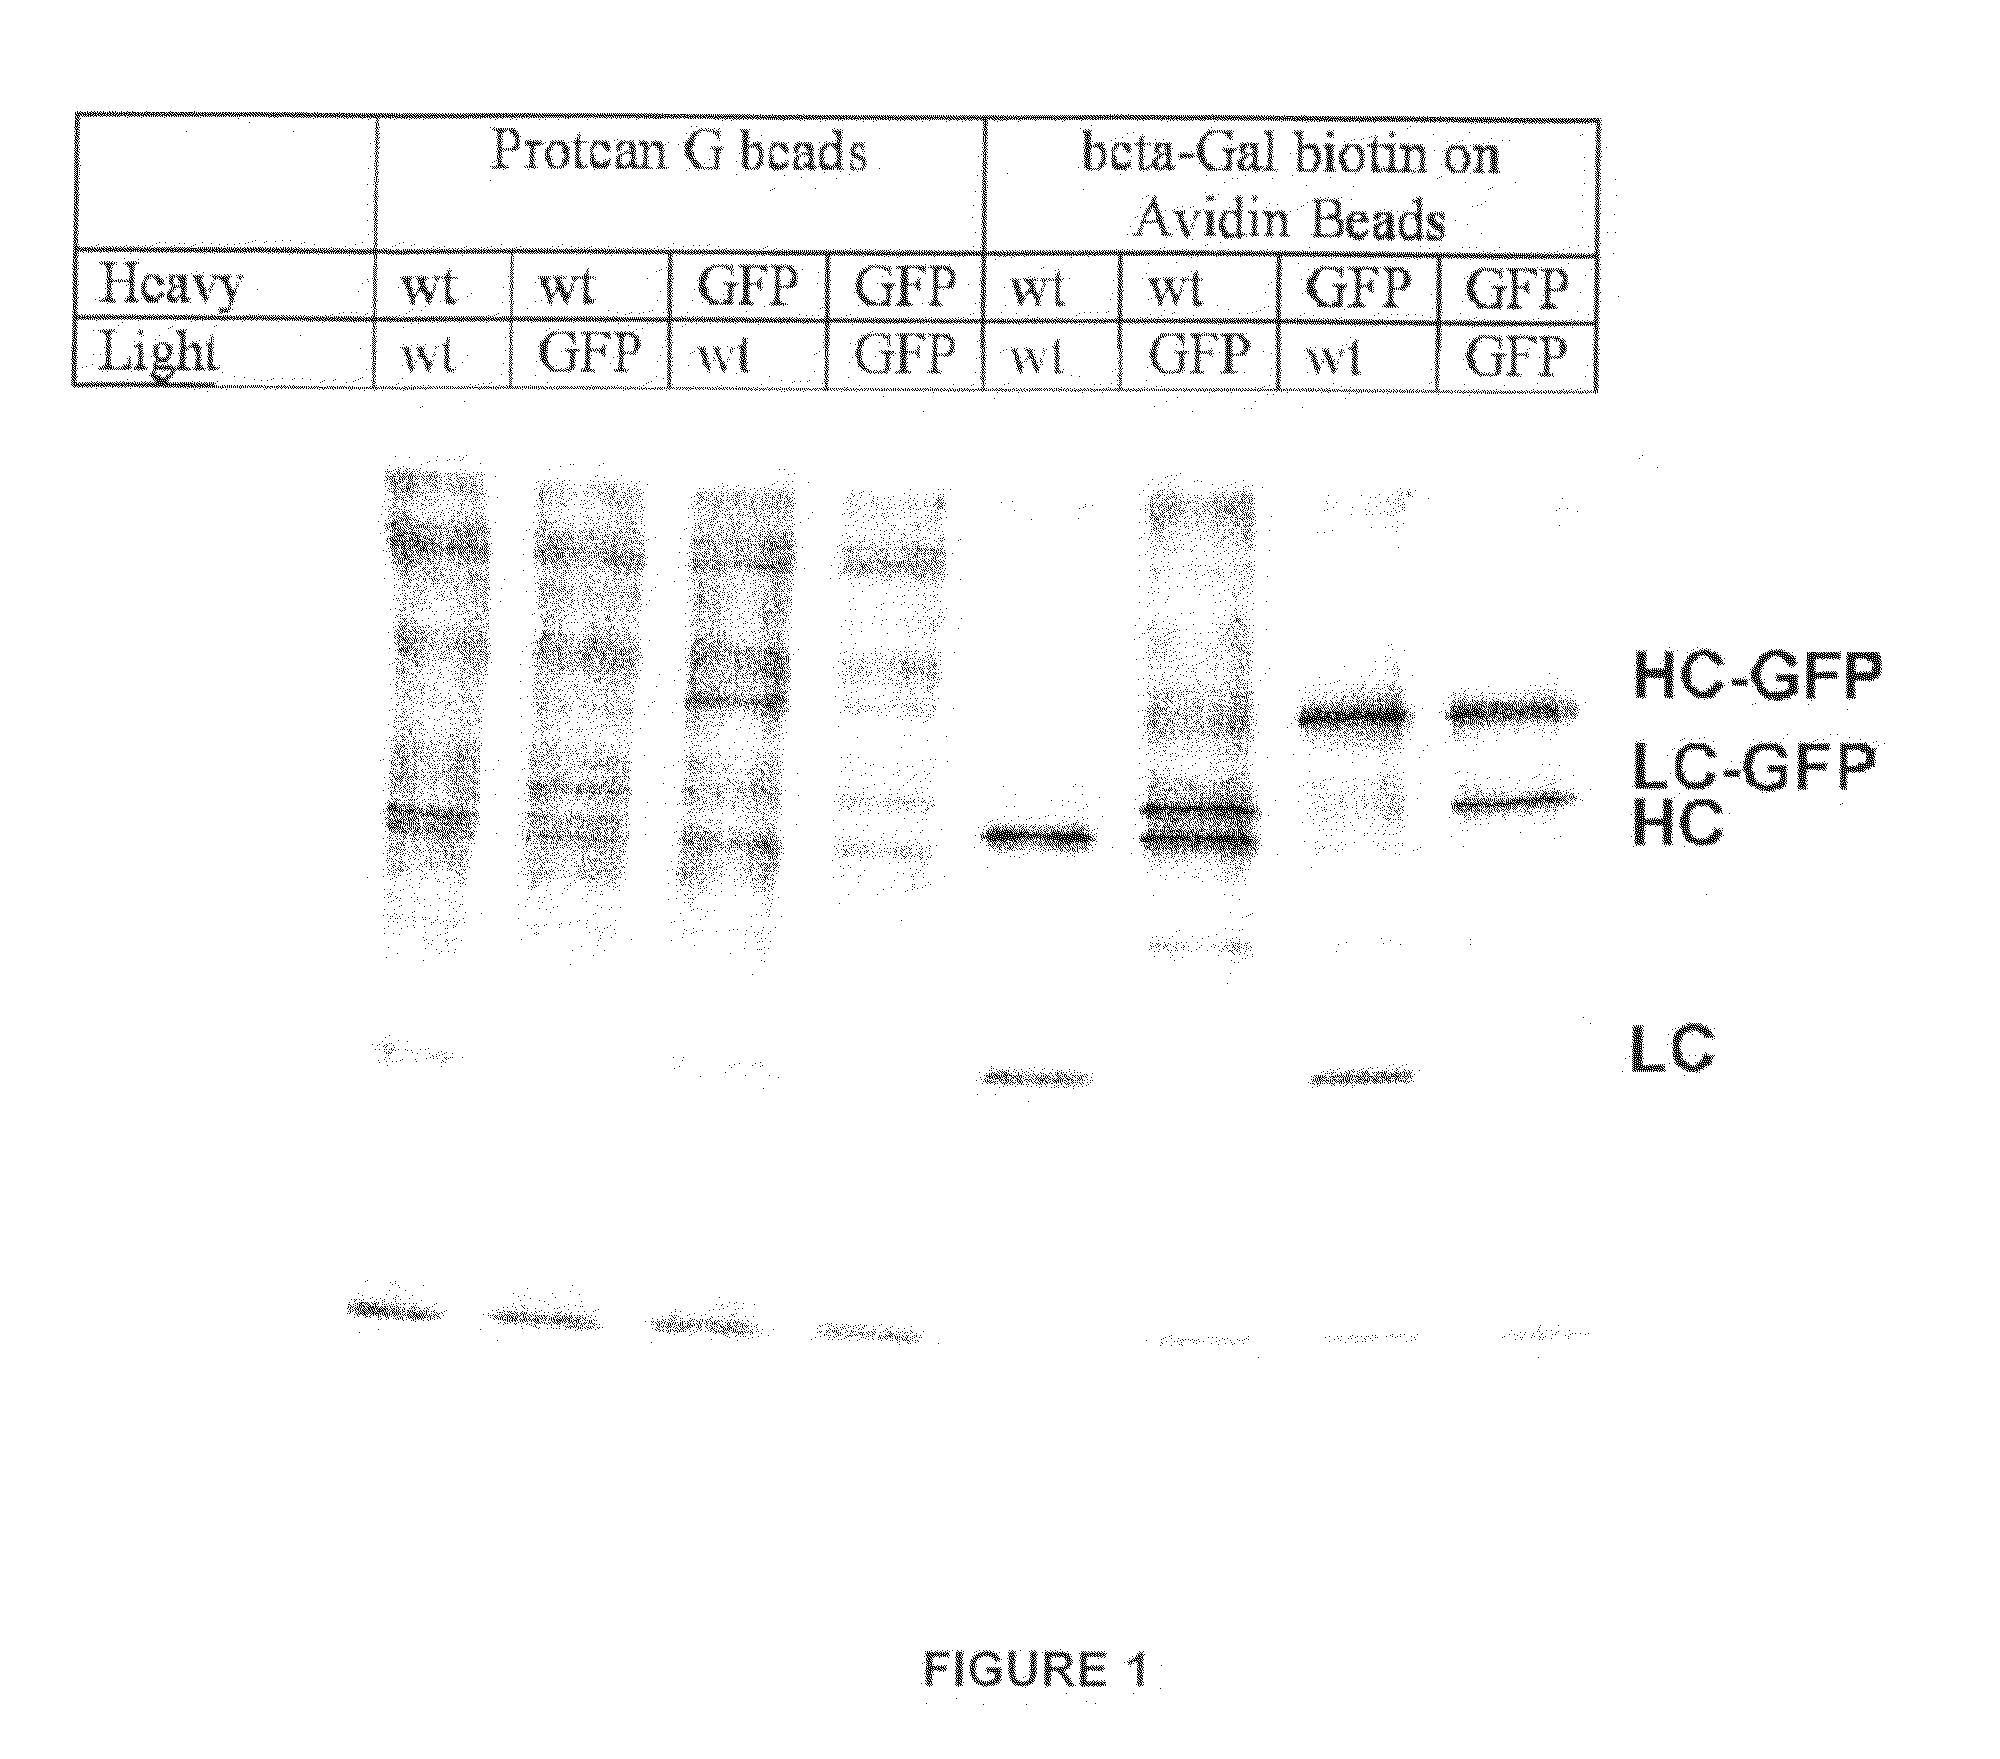 Animals, cells and methods for production of detectably-labeled antibodies